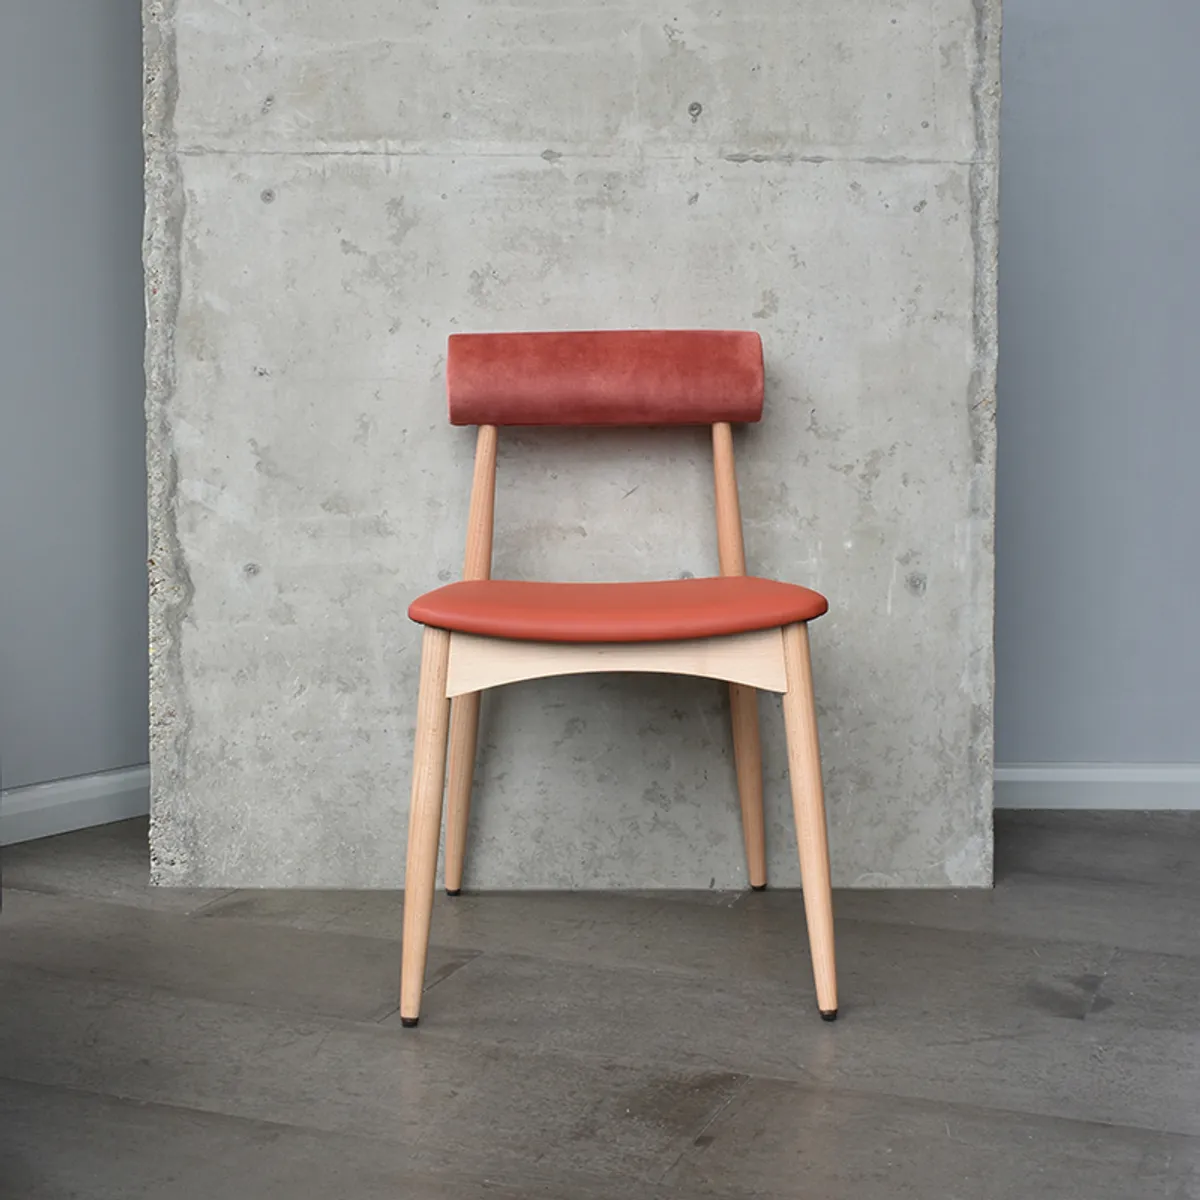 Rolla Side Chair New Furniture From Milan 2019 By Inside Out Contracts 020